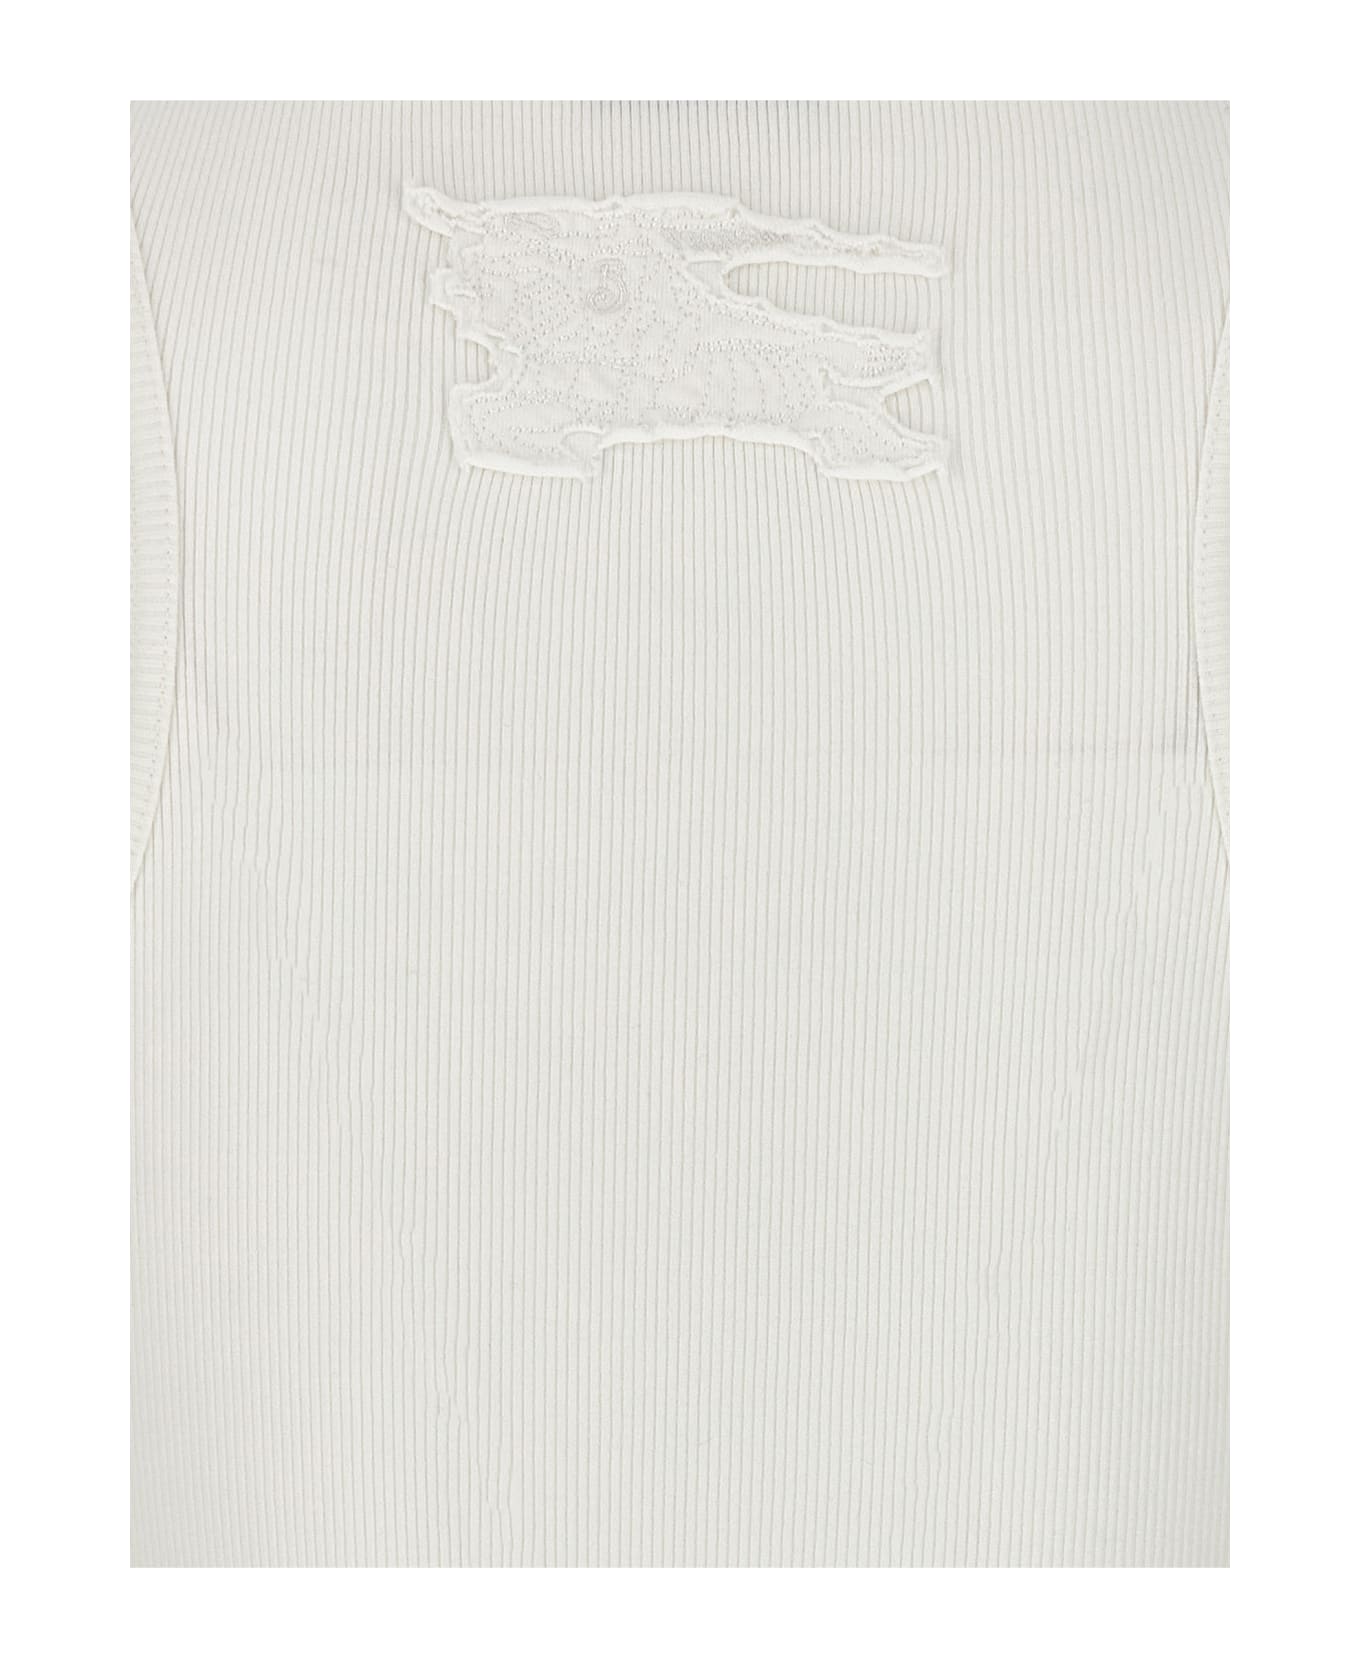 Burberry technical Logo Embroidery Tank Top - White